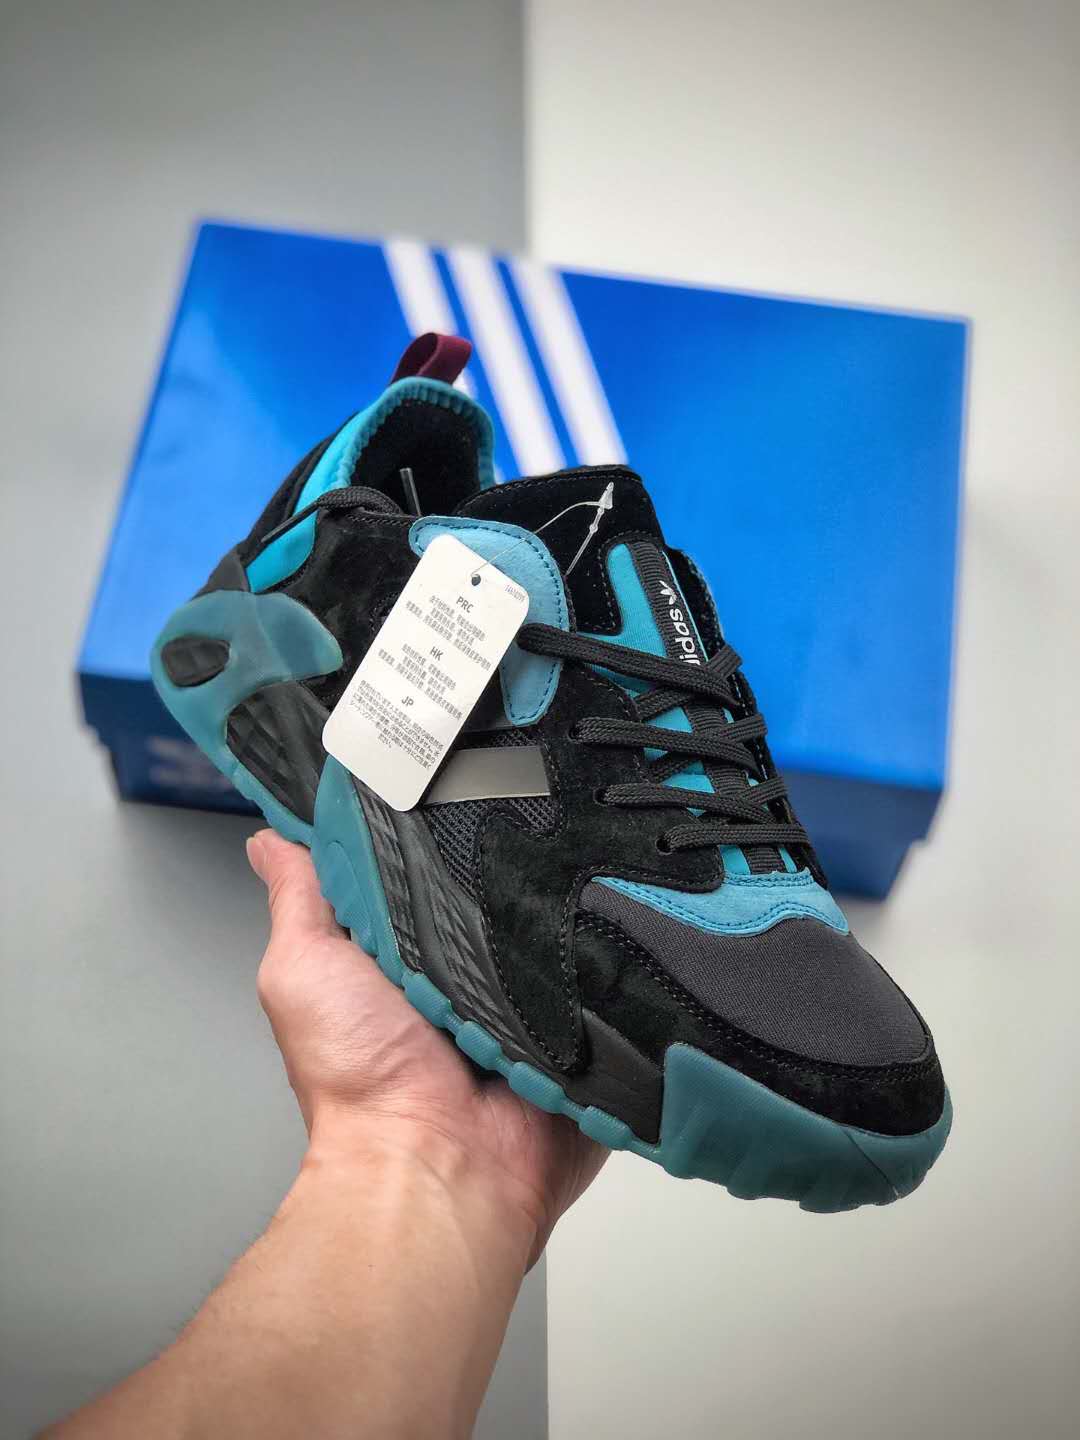 Adidas Originals Streetball Low Blue Black FW1216 - Trendy and Stylish Sneakers